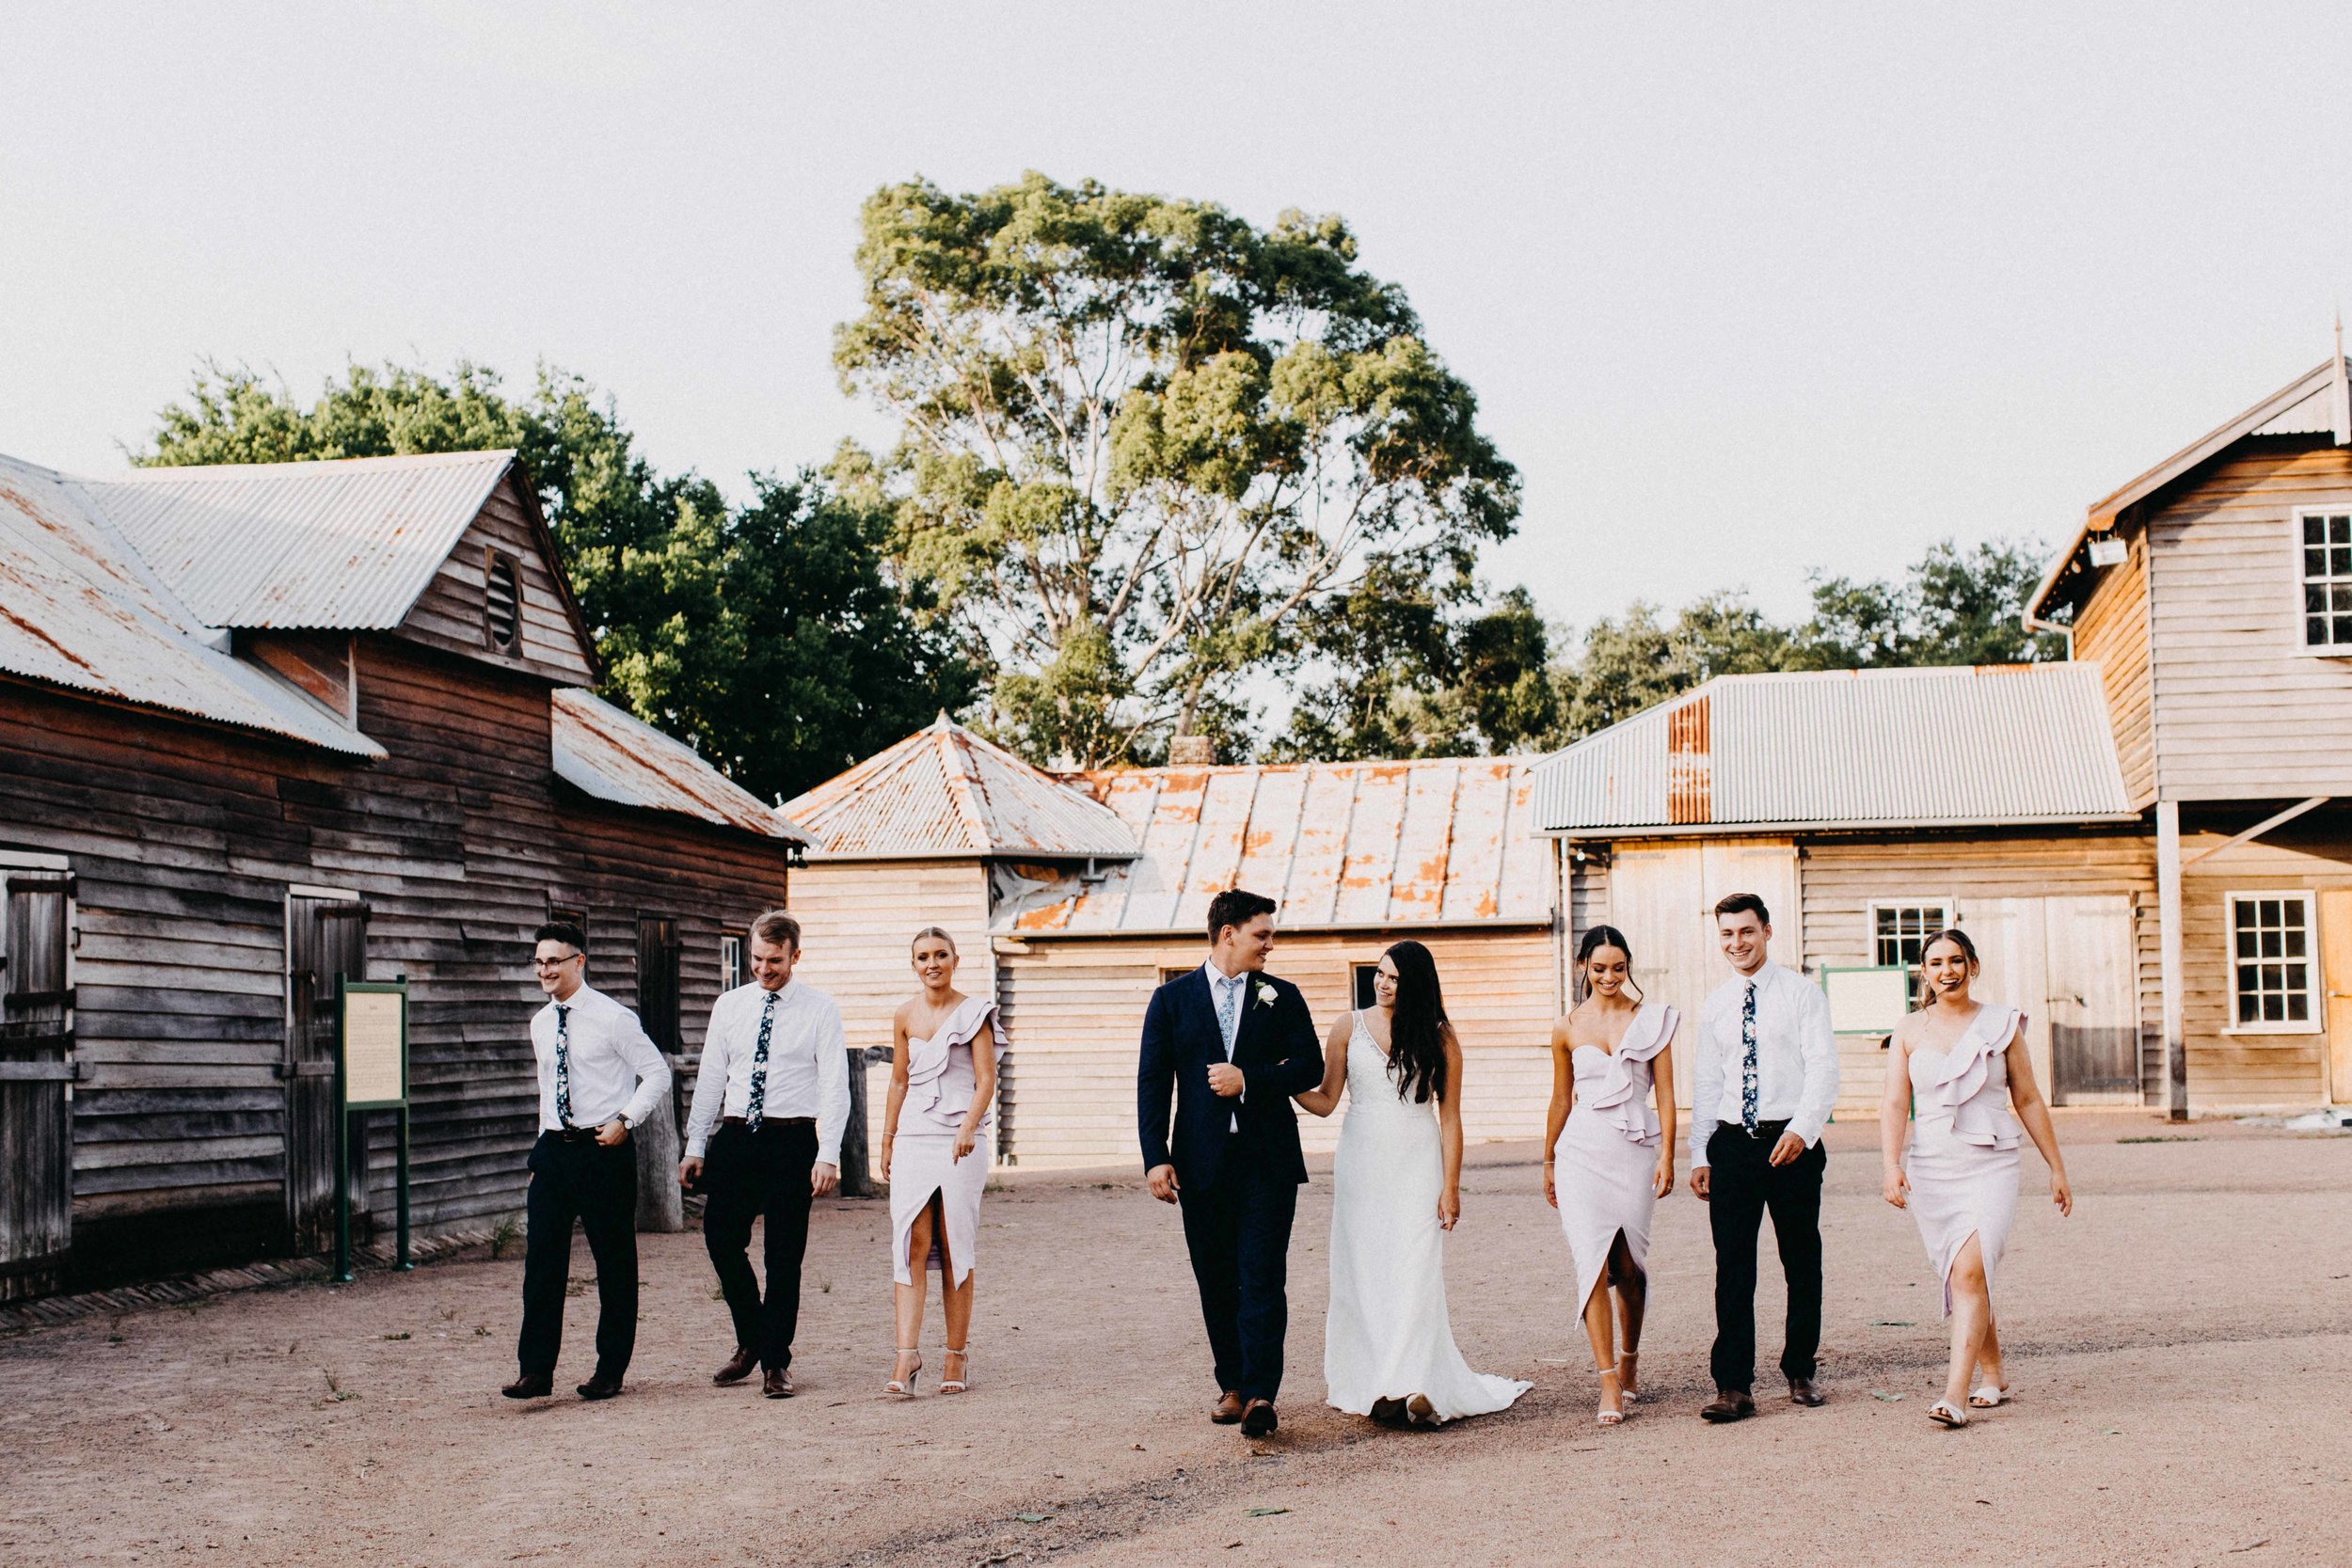 Our top picks for regional NSW wedding venues